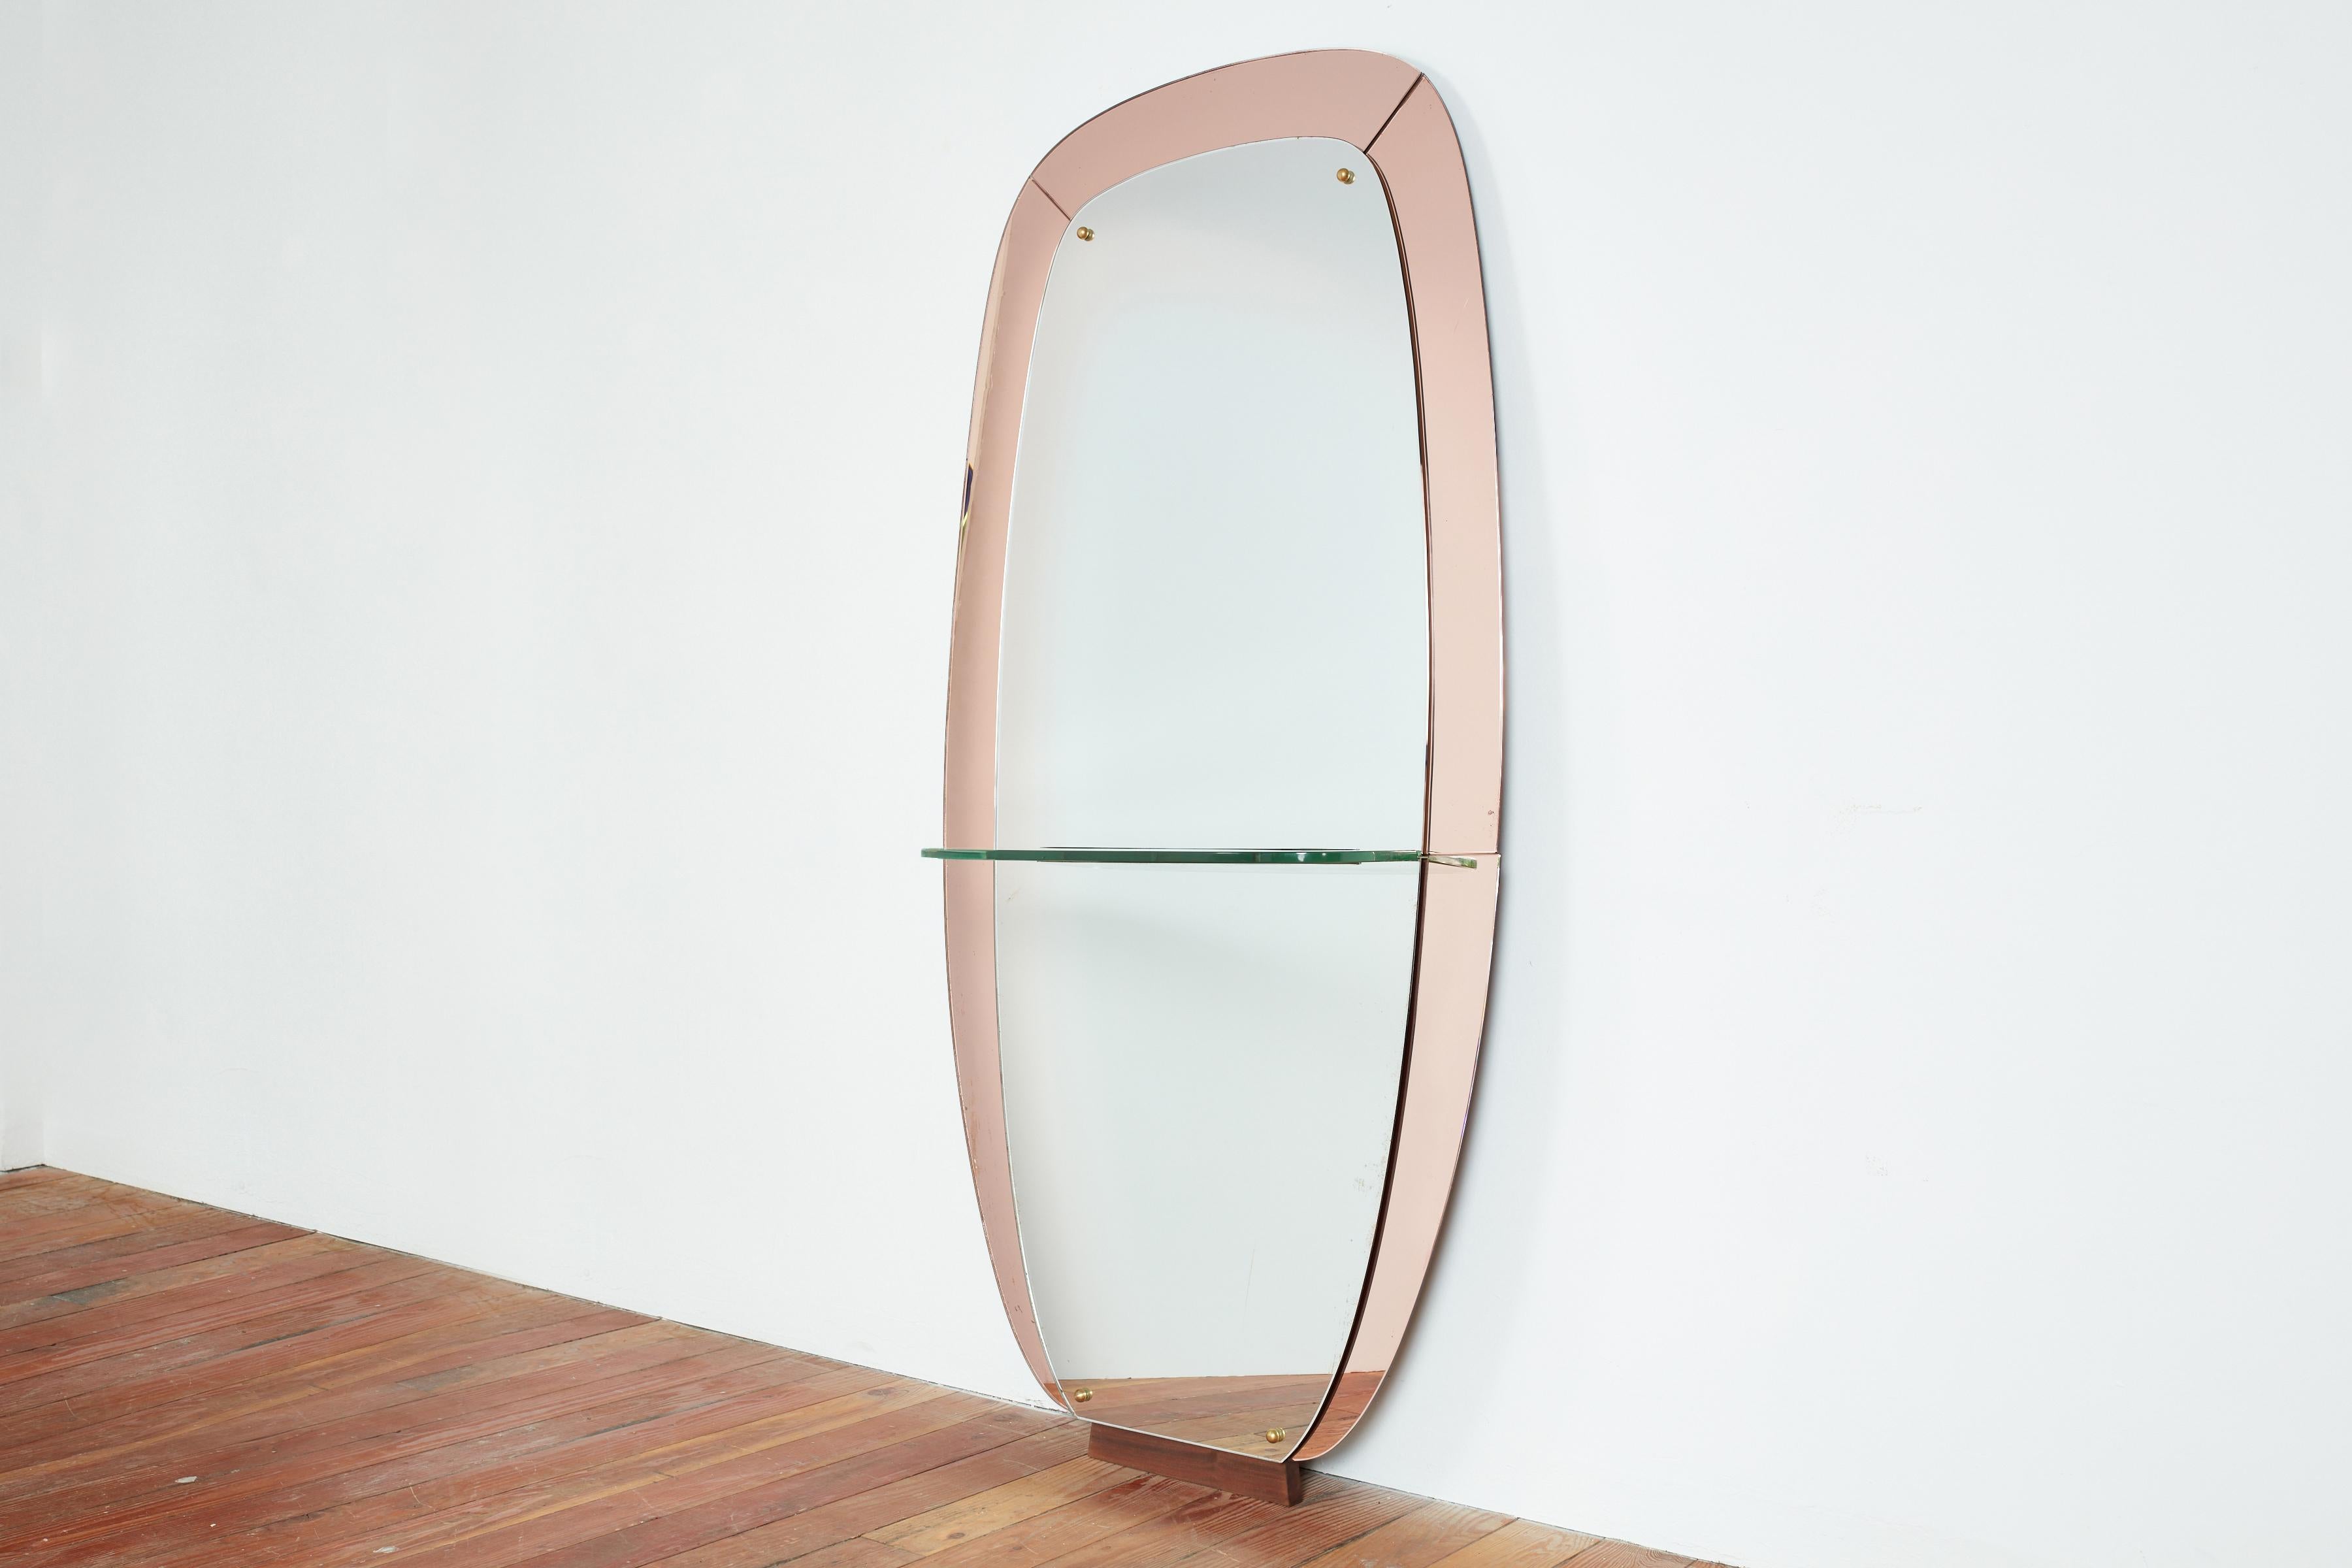 Beautiful rose colored Cristal Art Mirror with glass shelf. 
Wonderful shape with pale pink glass and glass accents - sits on a walnut wood base. 

Italy, 1950s